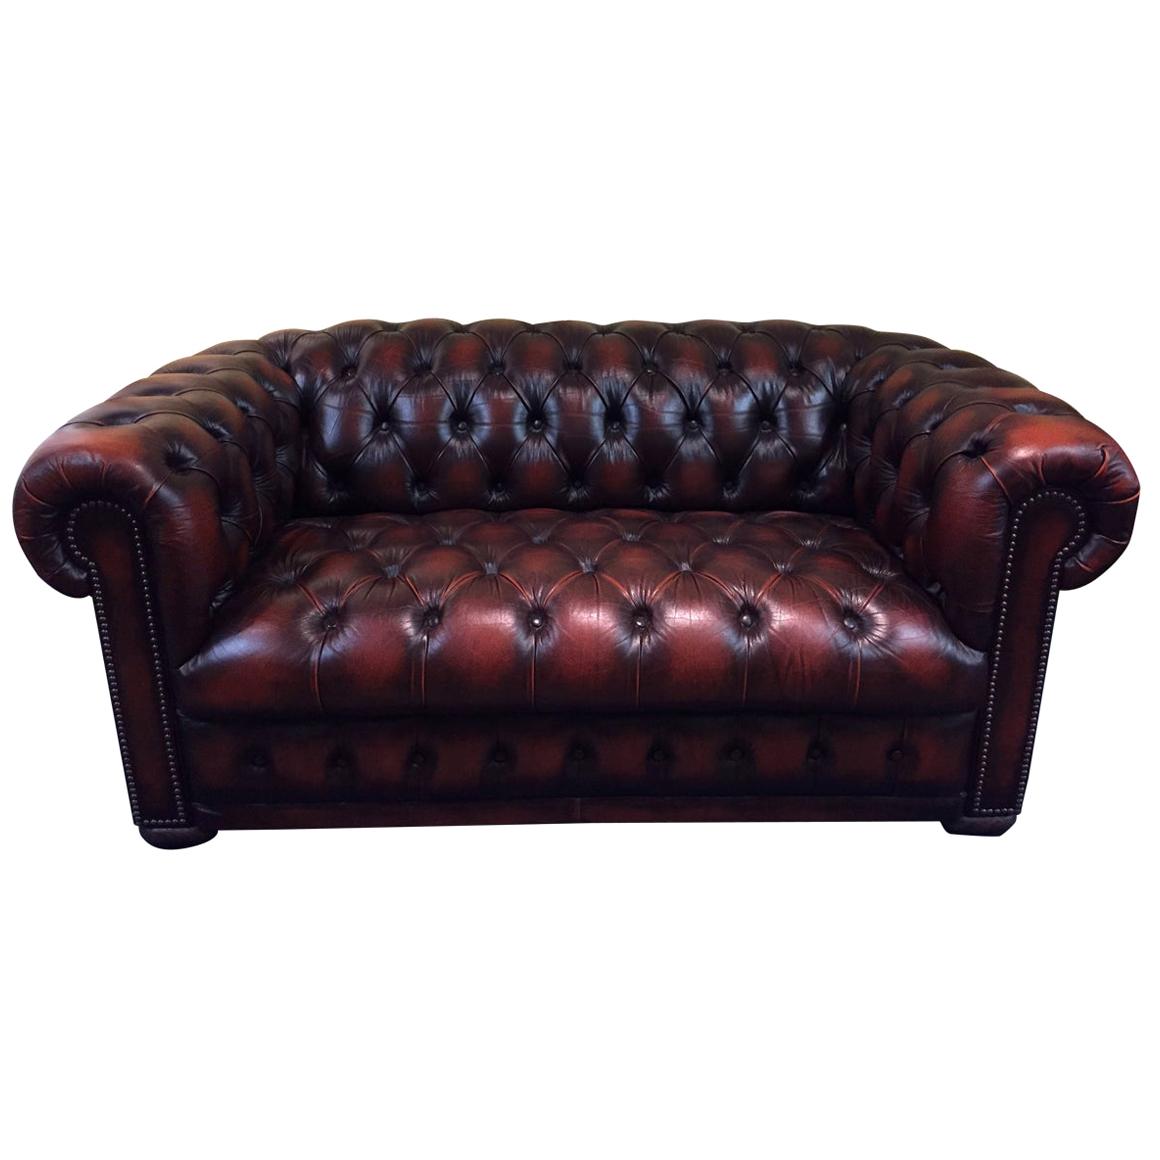 High Quality Chesterfield Two-Seat Sofa Made in England